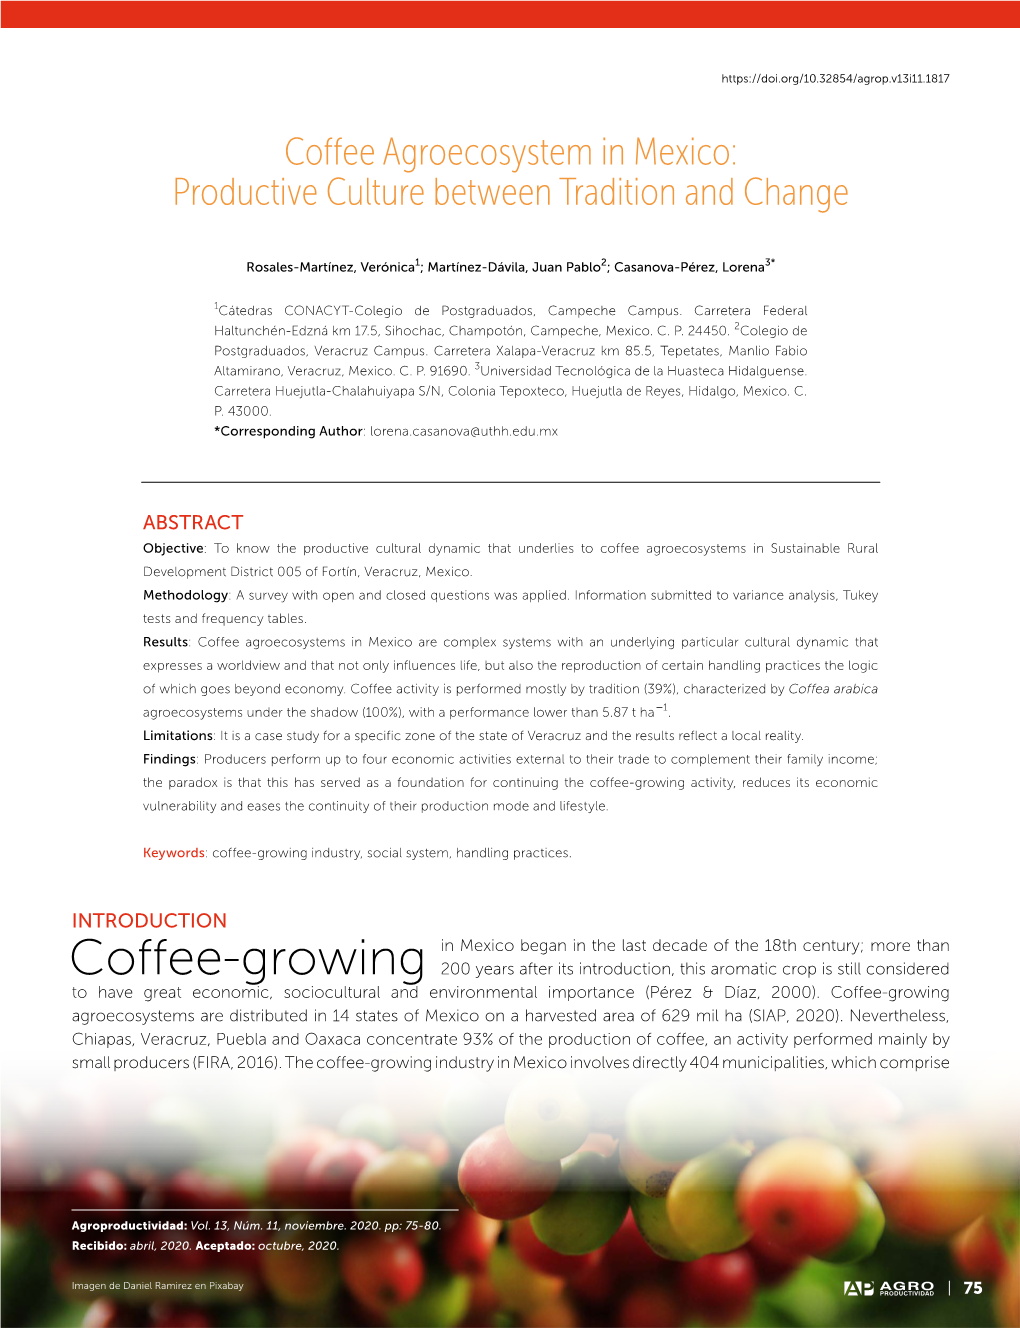 Coffee Agroecosystem in Mexico: Productive Culture Between Tradition and Change